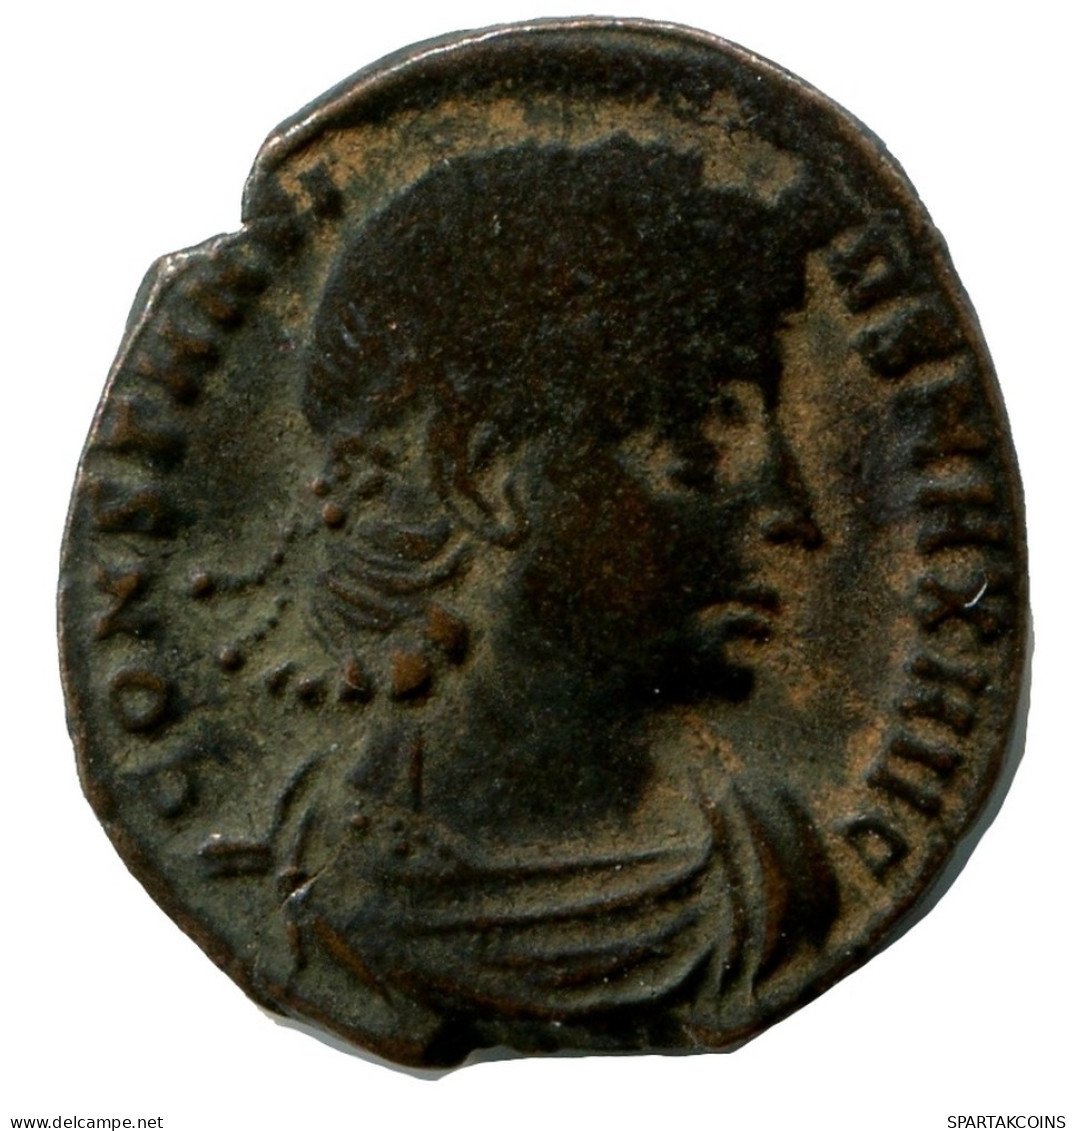 CONSTANTINE I CONSTANTINOPLE FROM THE ROYAL ONTARIO MUSEUM #ANC10805.14.U.A - El Imperio Christiano (307 / 363)